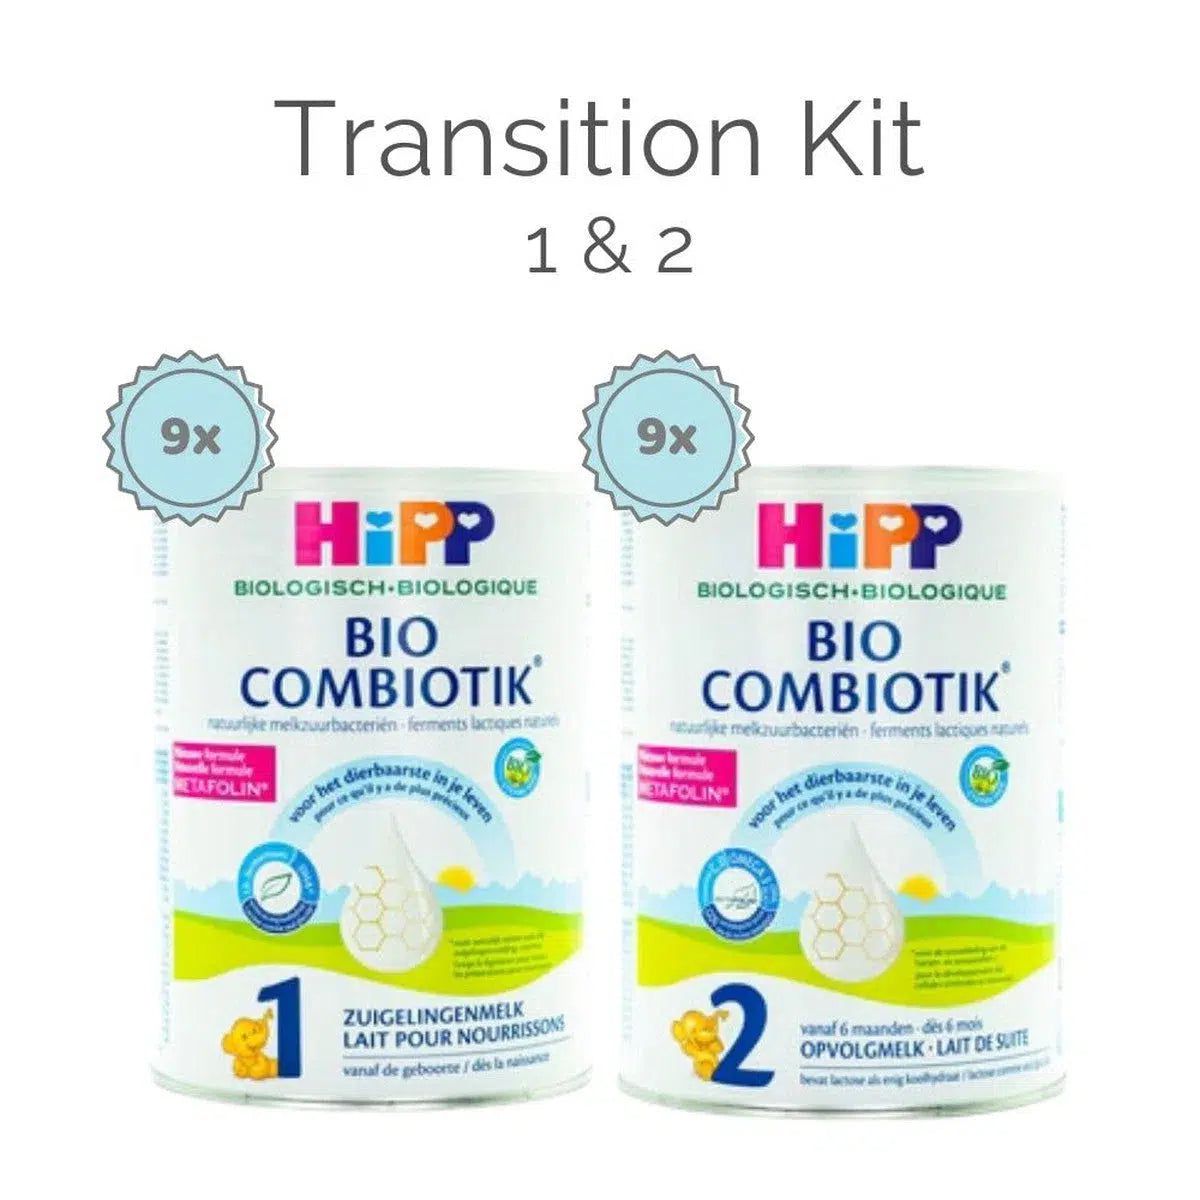 HiPP Stage 1 / Stage 2 "Full Supply" Transition Kit - Organic Combiotic Baby Milk Formula (800g) - Dutch Version - 18 Cans